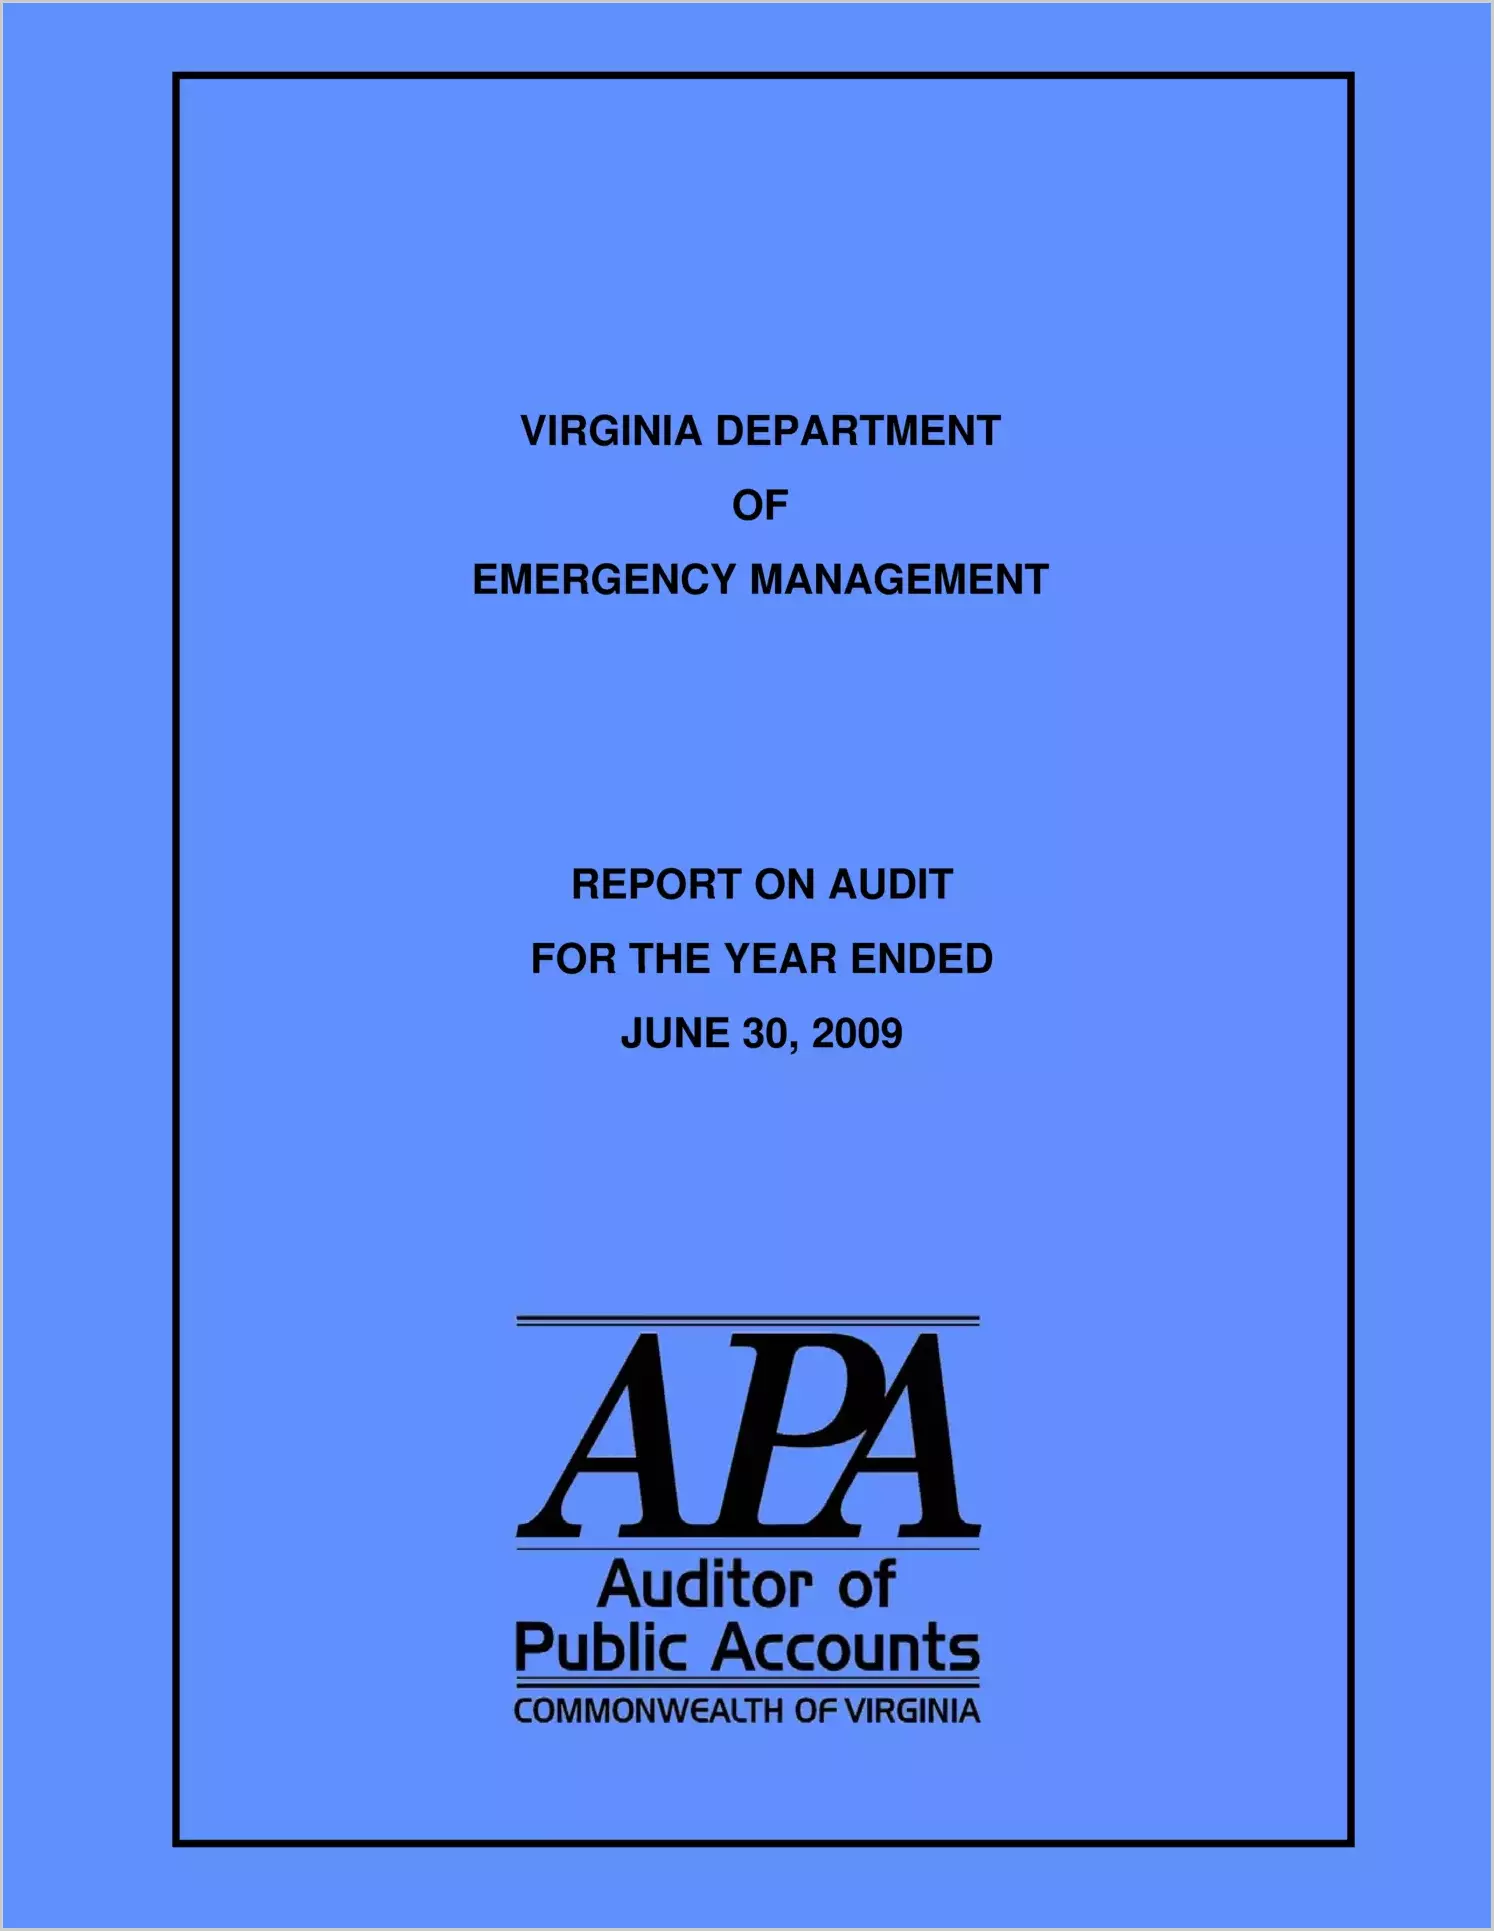 Virginia Department of Emergency Management report on audit for the year ended June 30, 2009